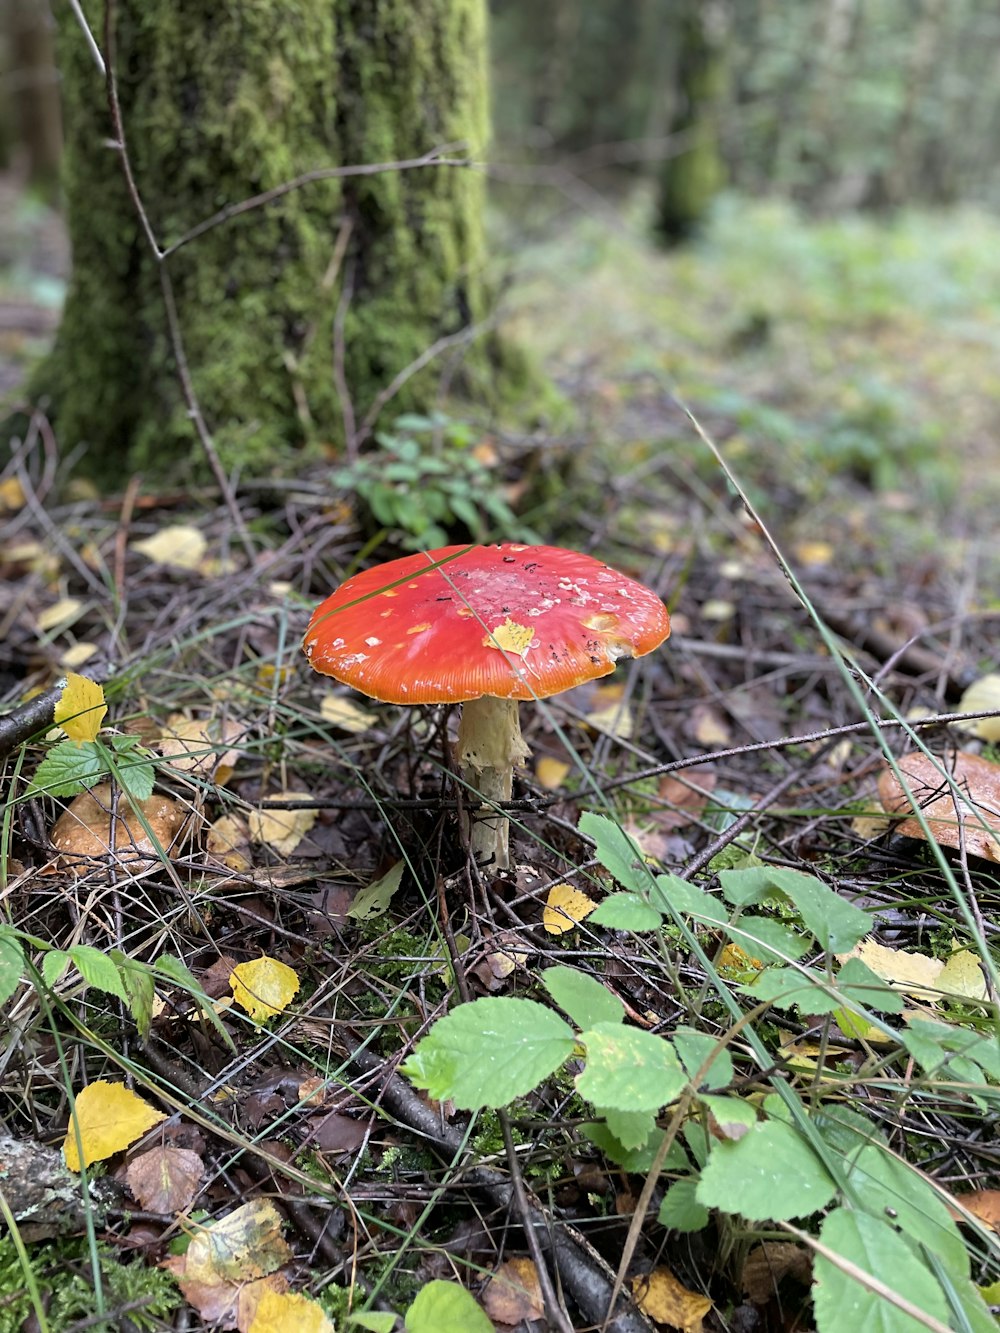 a red mushroom growing in the woods